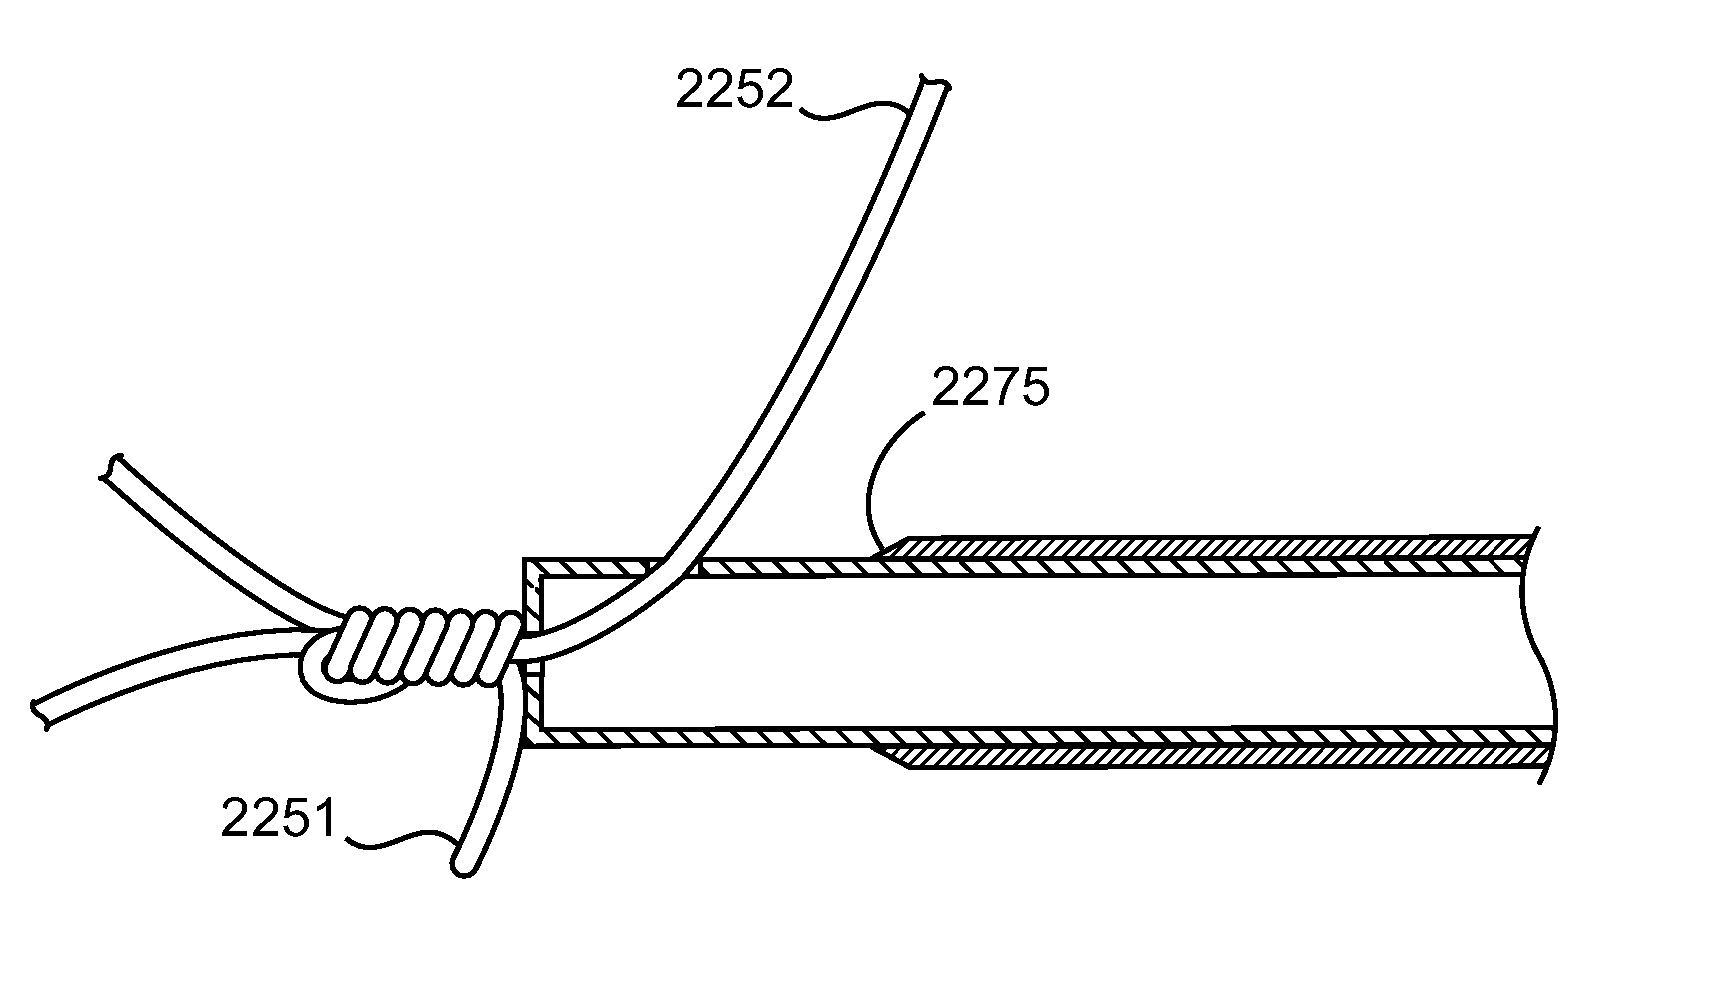 Minimally Invasive Procedure for Implanting an Annuloplasty Device